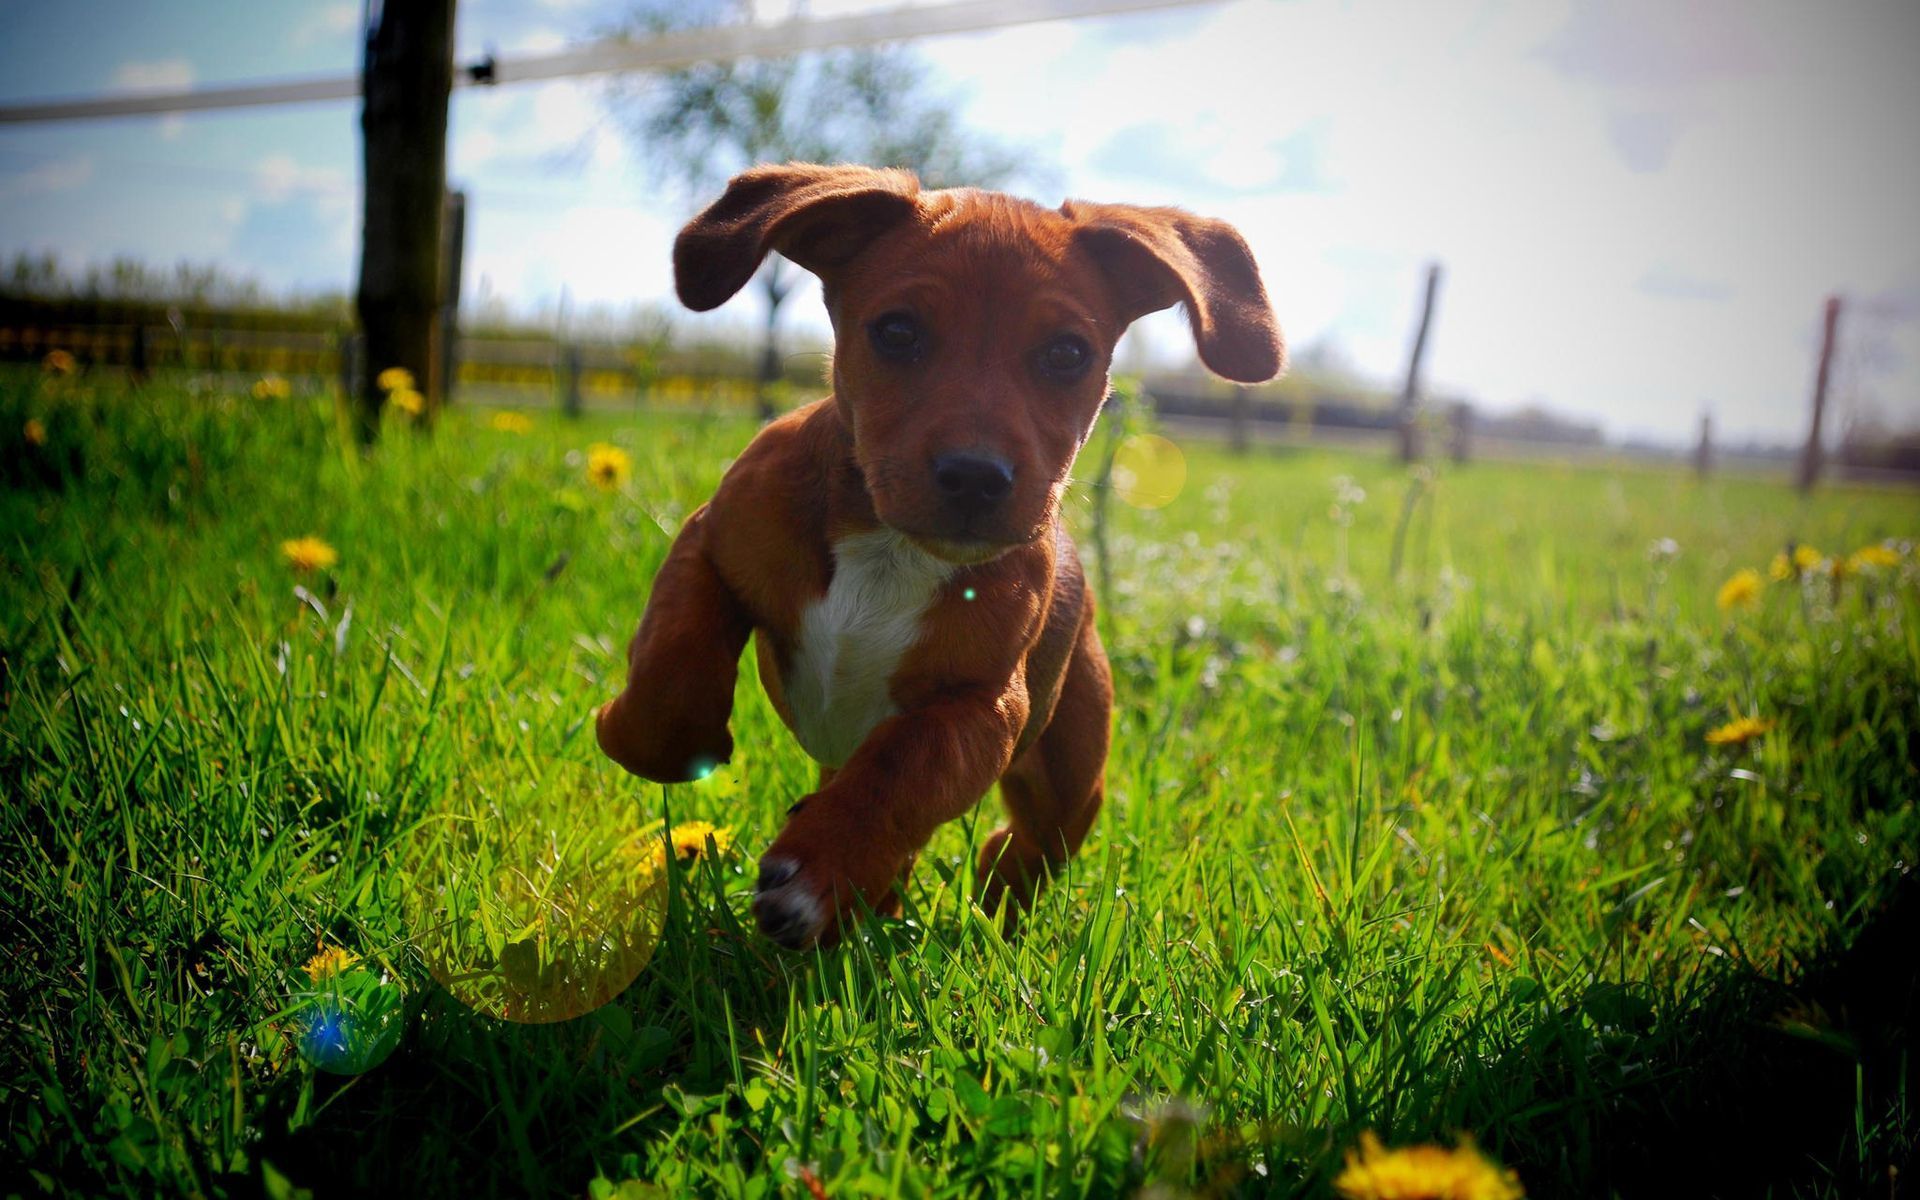 A cute brown puppy running in the grass. Cute animals, Super cute dogs, Animal humor dog